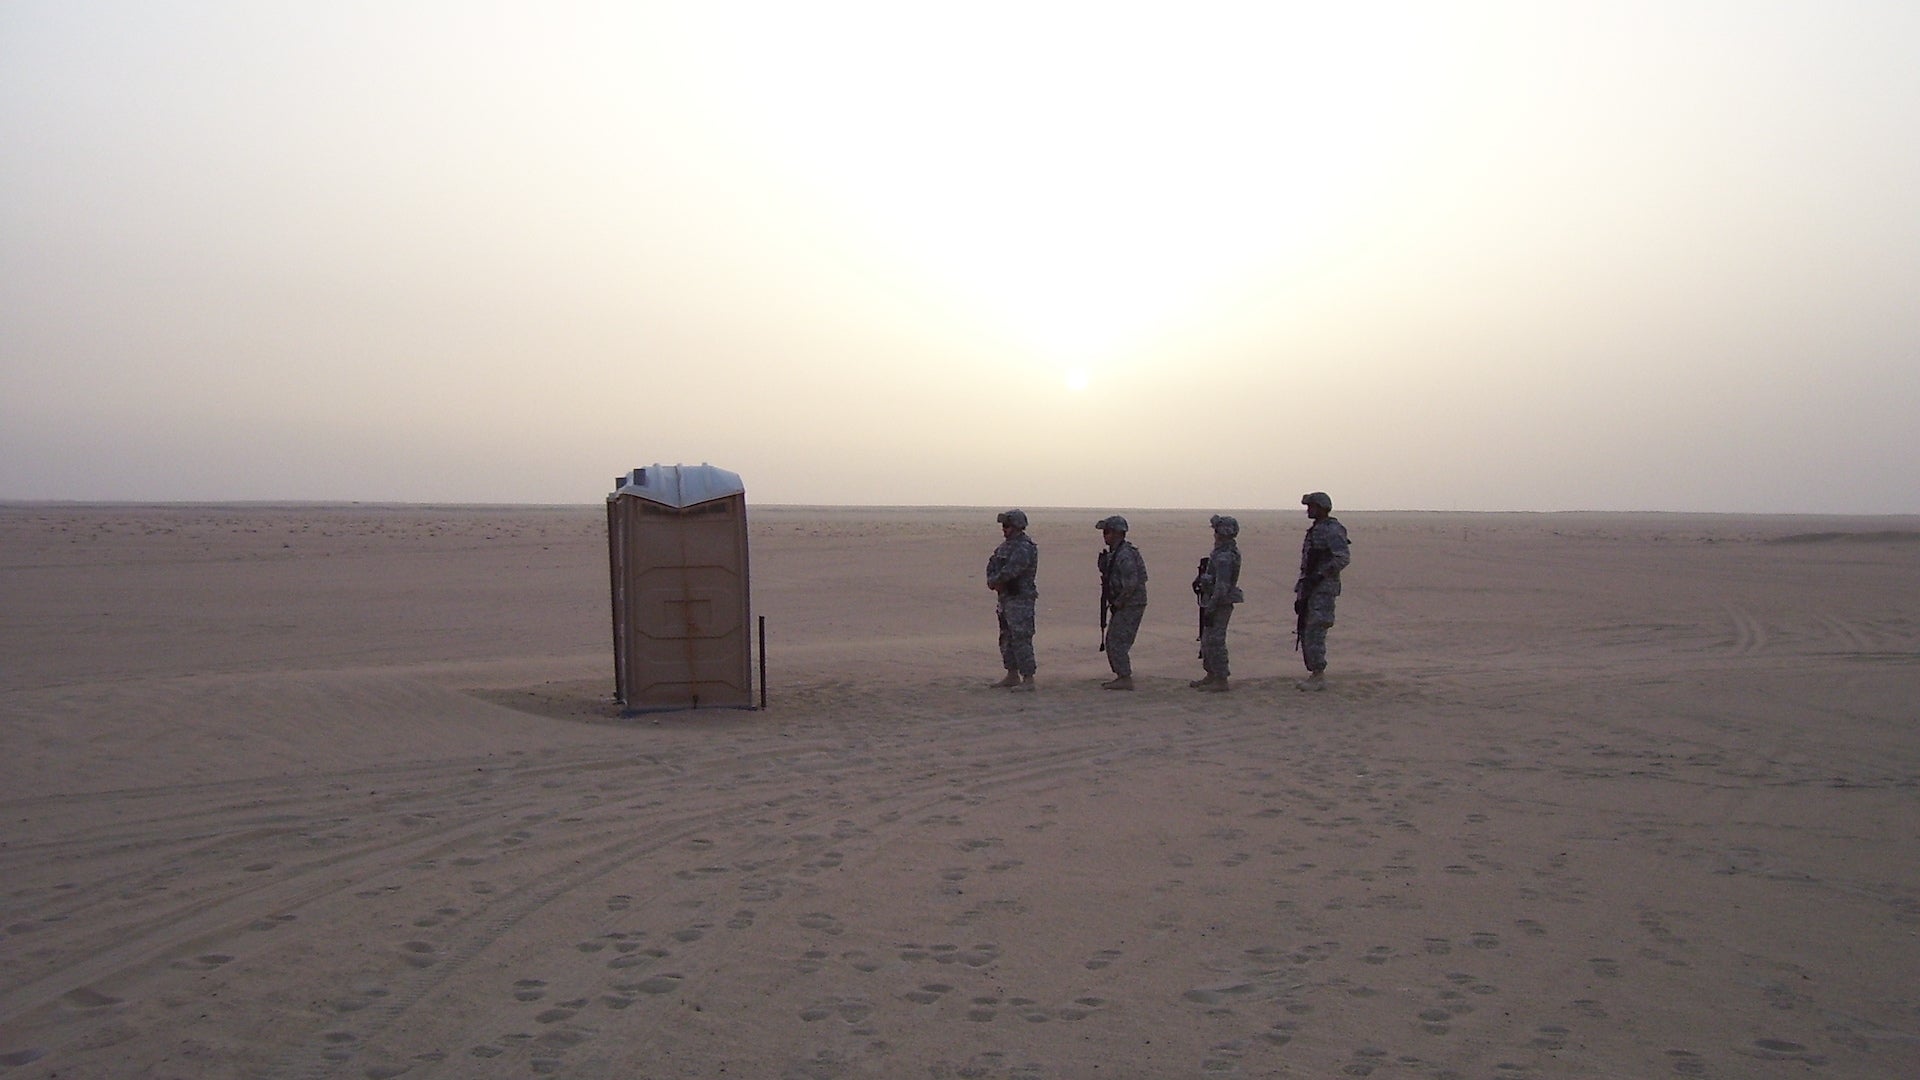 Sailors assigned to Navy Provisional Detainee Battalion VI wait to use the portable toilet while training at the Udari Range in Kuwait. (U.S. Navy photo by Chief Master-at-Arms Tony Guyette/Released).